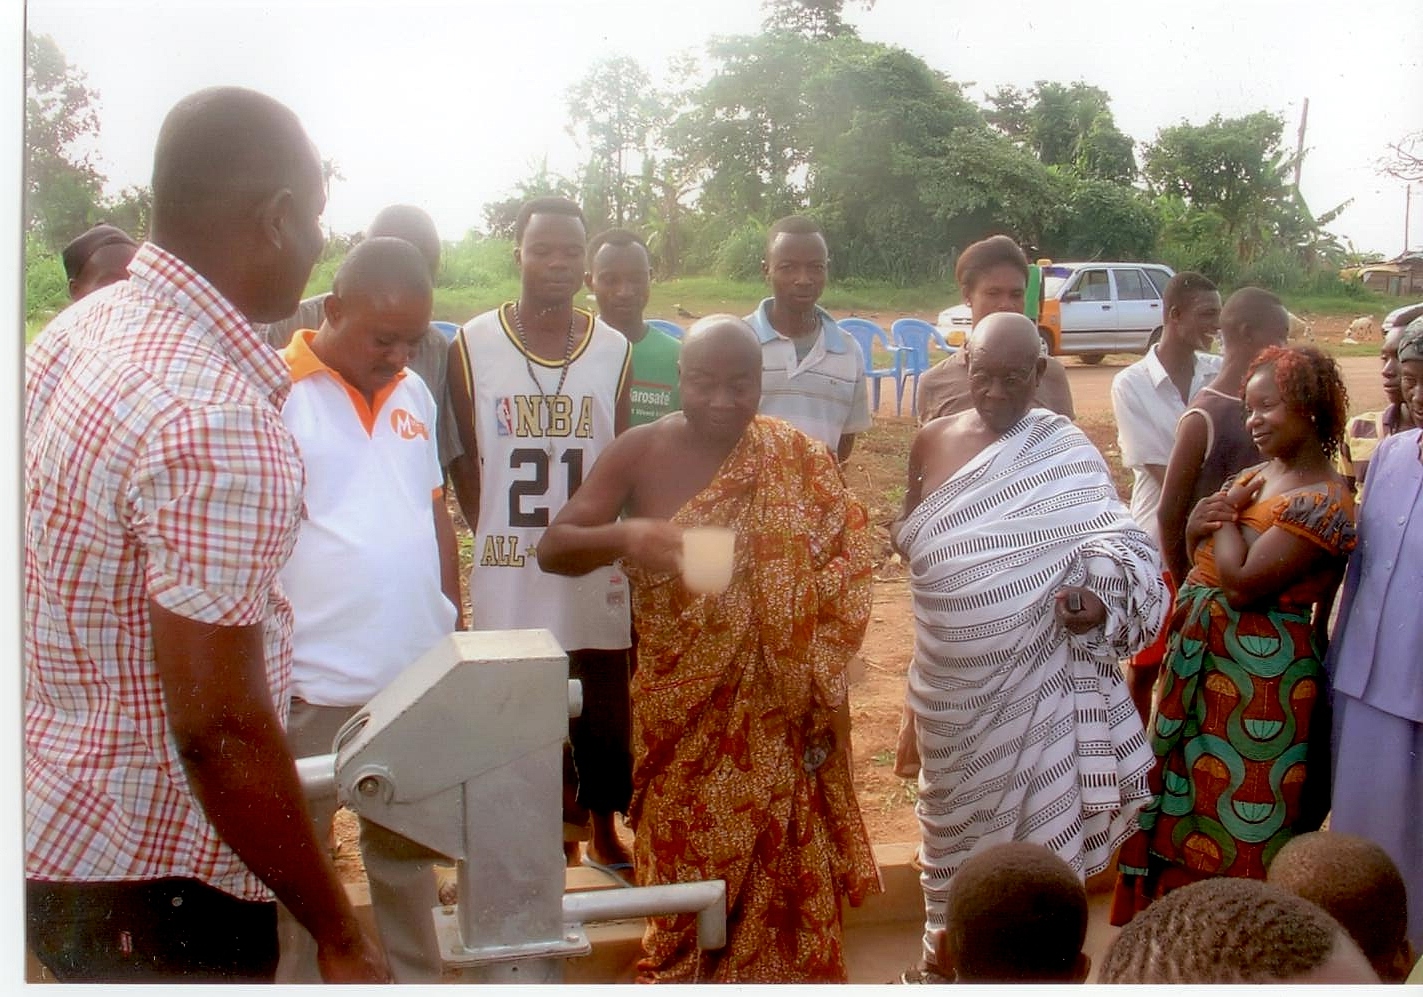 CELEBRATION OF THE COMPLECTION OF THE BOREHOLE